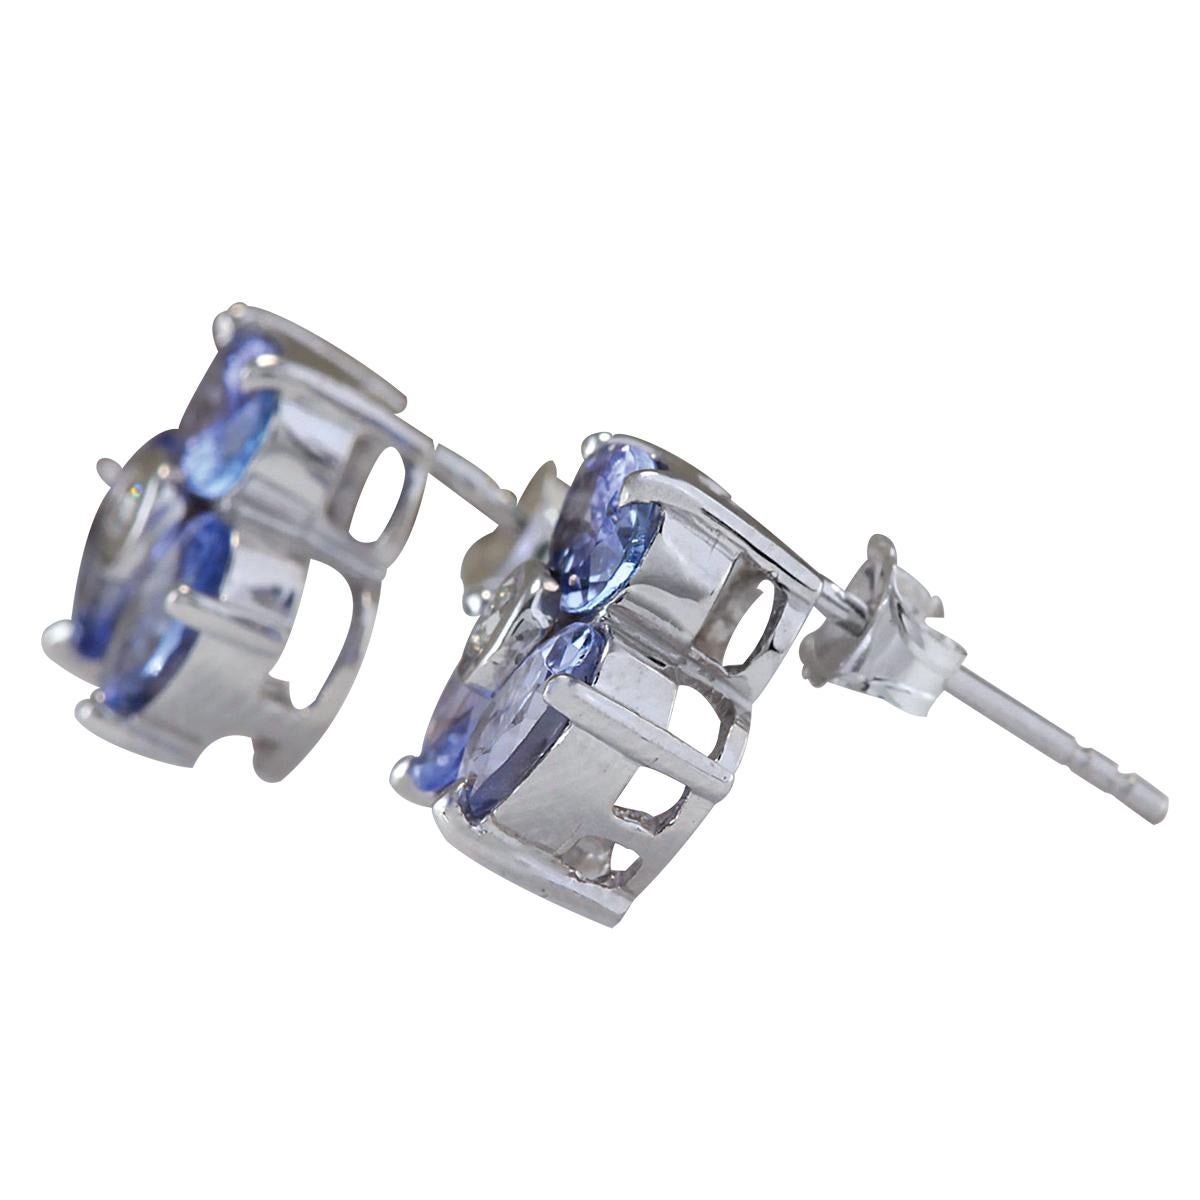 Stamped: 14K White Gold
Total Earrings Weight: 3.1 Grams
Total Natural Tanzanite Weight is 3.00 Carat
Color: Blue
Total Natural Diamond Weight is 0.08 Carat
Color: F-G, Clarity: VS2-SI1
Face Measures: 10.15x11.05 mm
Sku: [702363W]